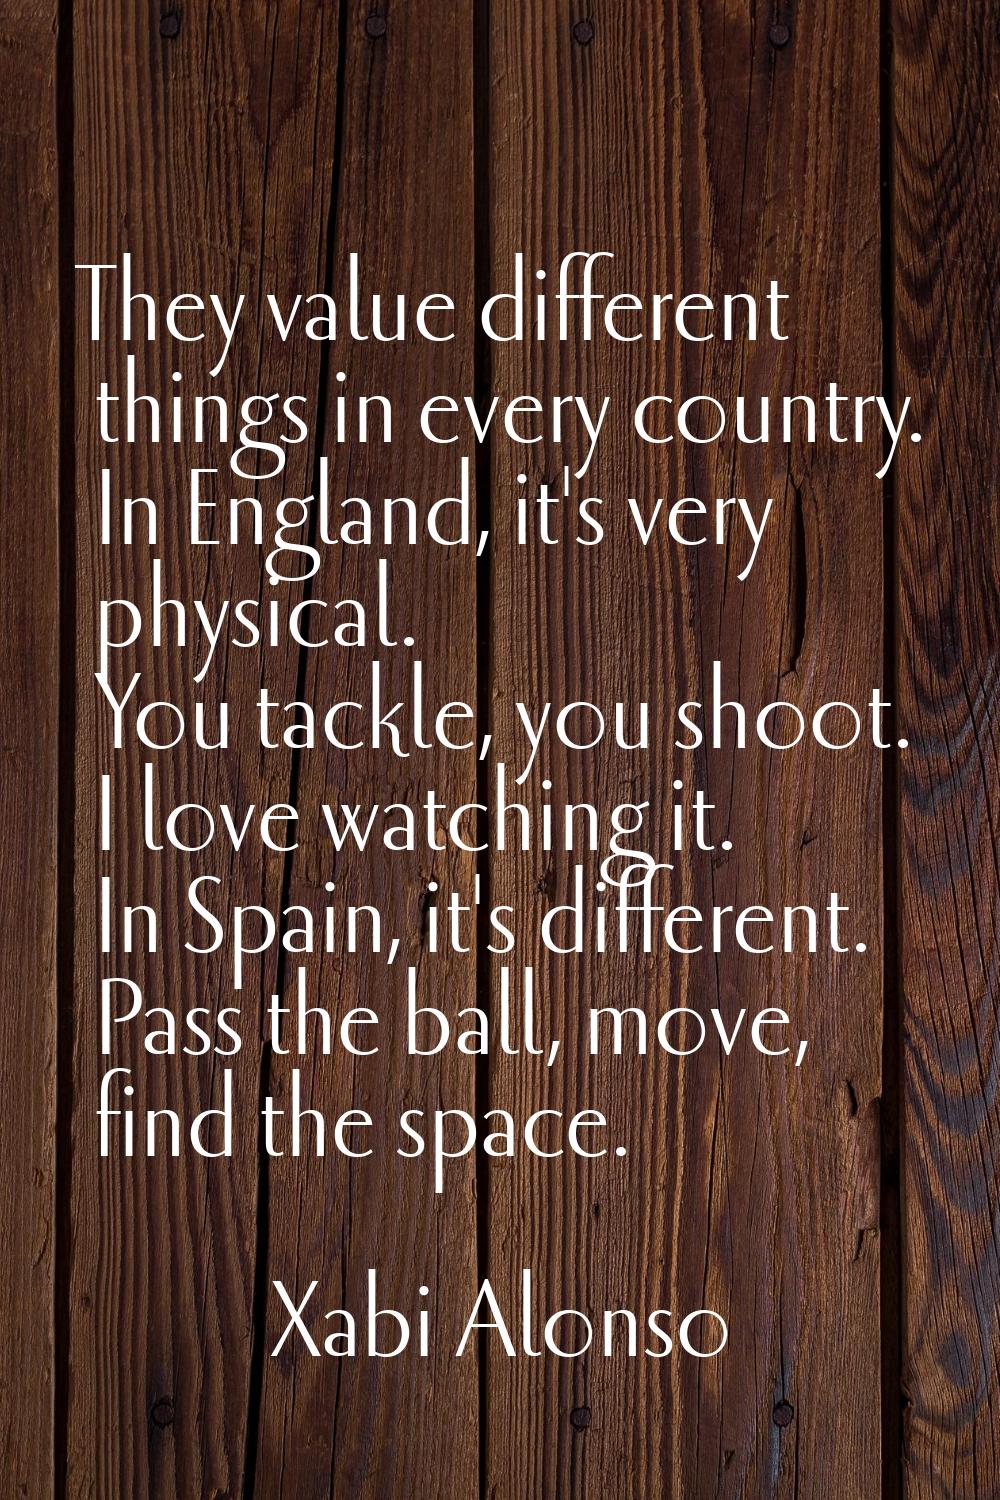 They value different things in every country. In England, it's very physical. You tackle, you shoot